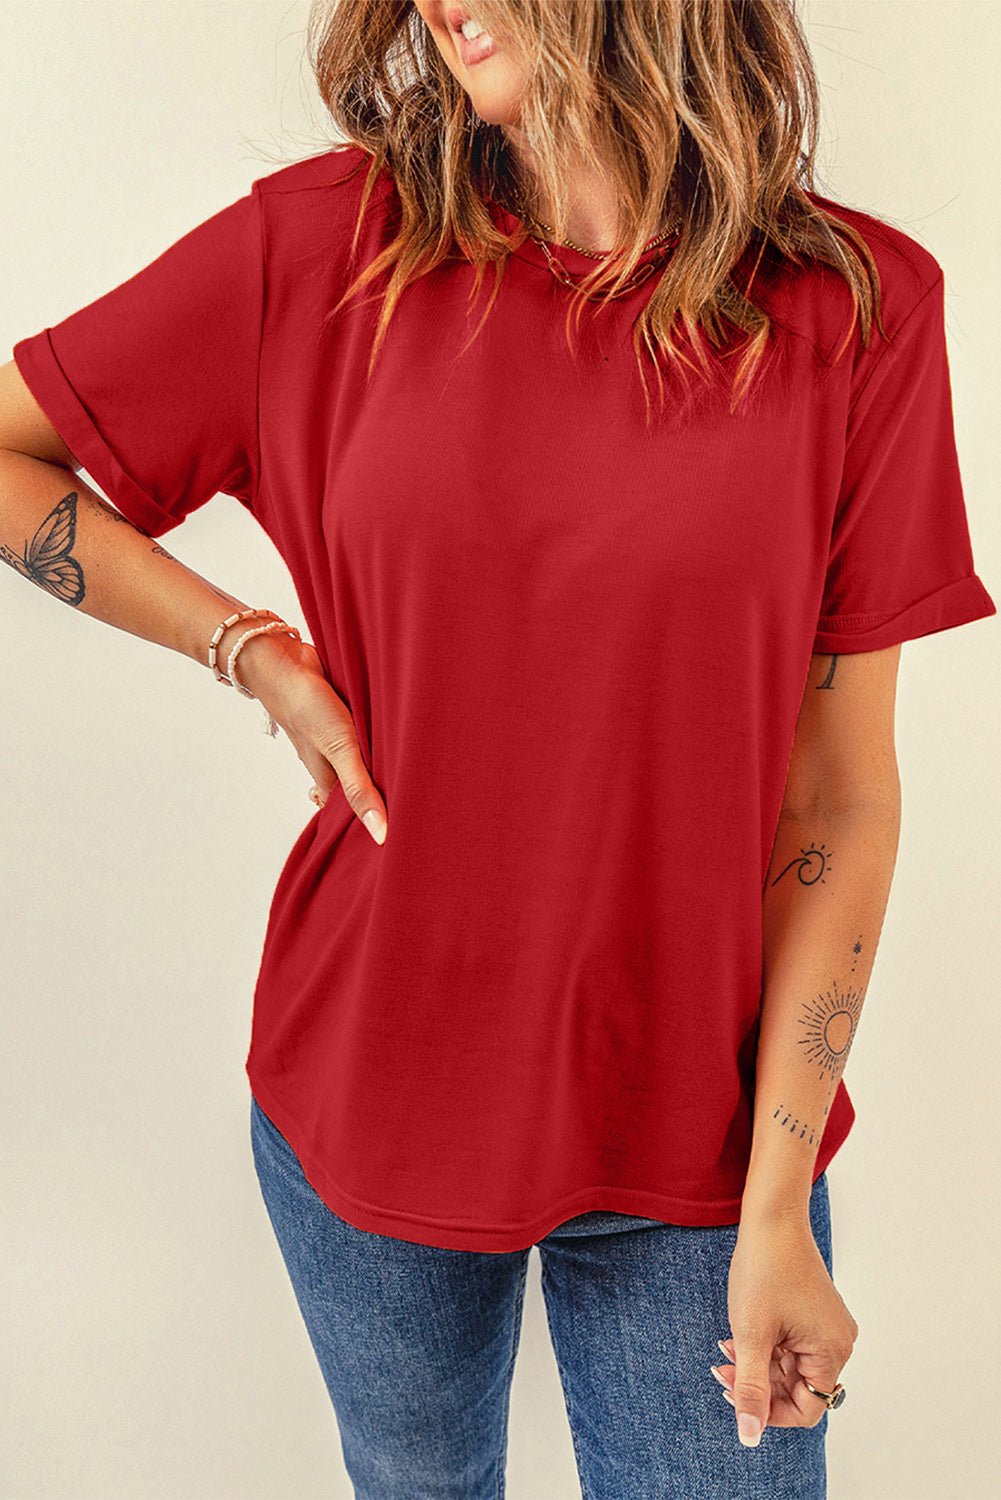 Round Neck Cuffed Short Sleeve Tee - Red / S - T-Shirts - Shirts & Tops - 5 - 2024